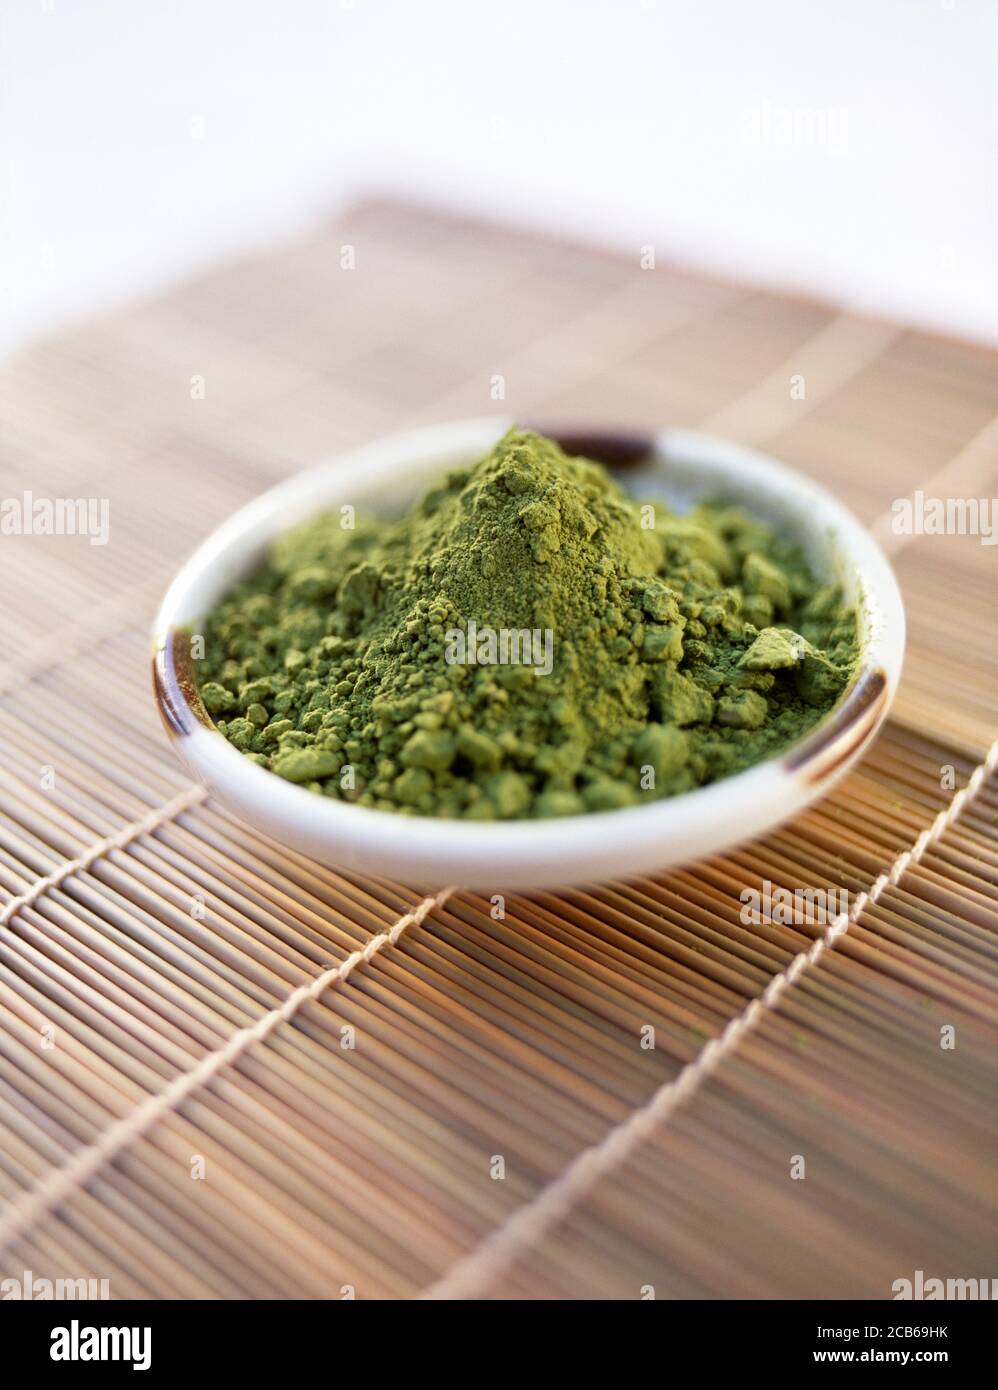 A mound of powdered green tea in a saucer Stock Photo